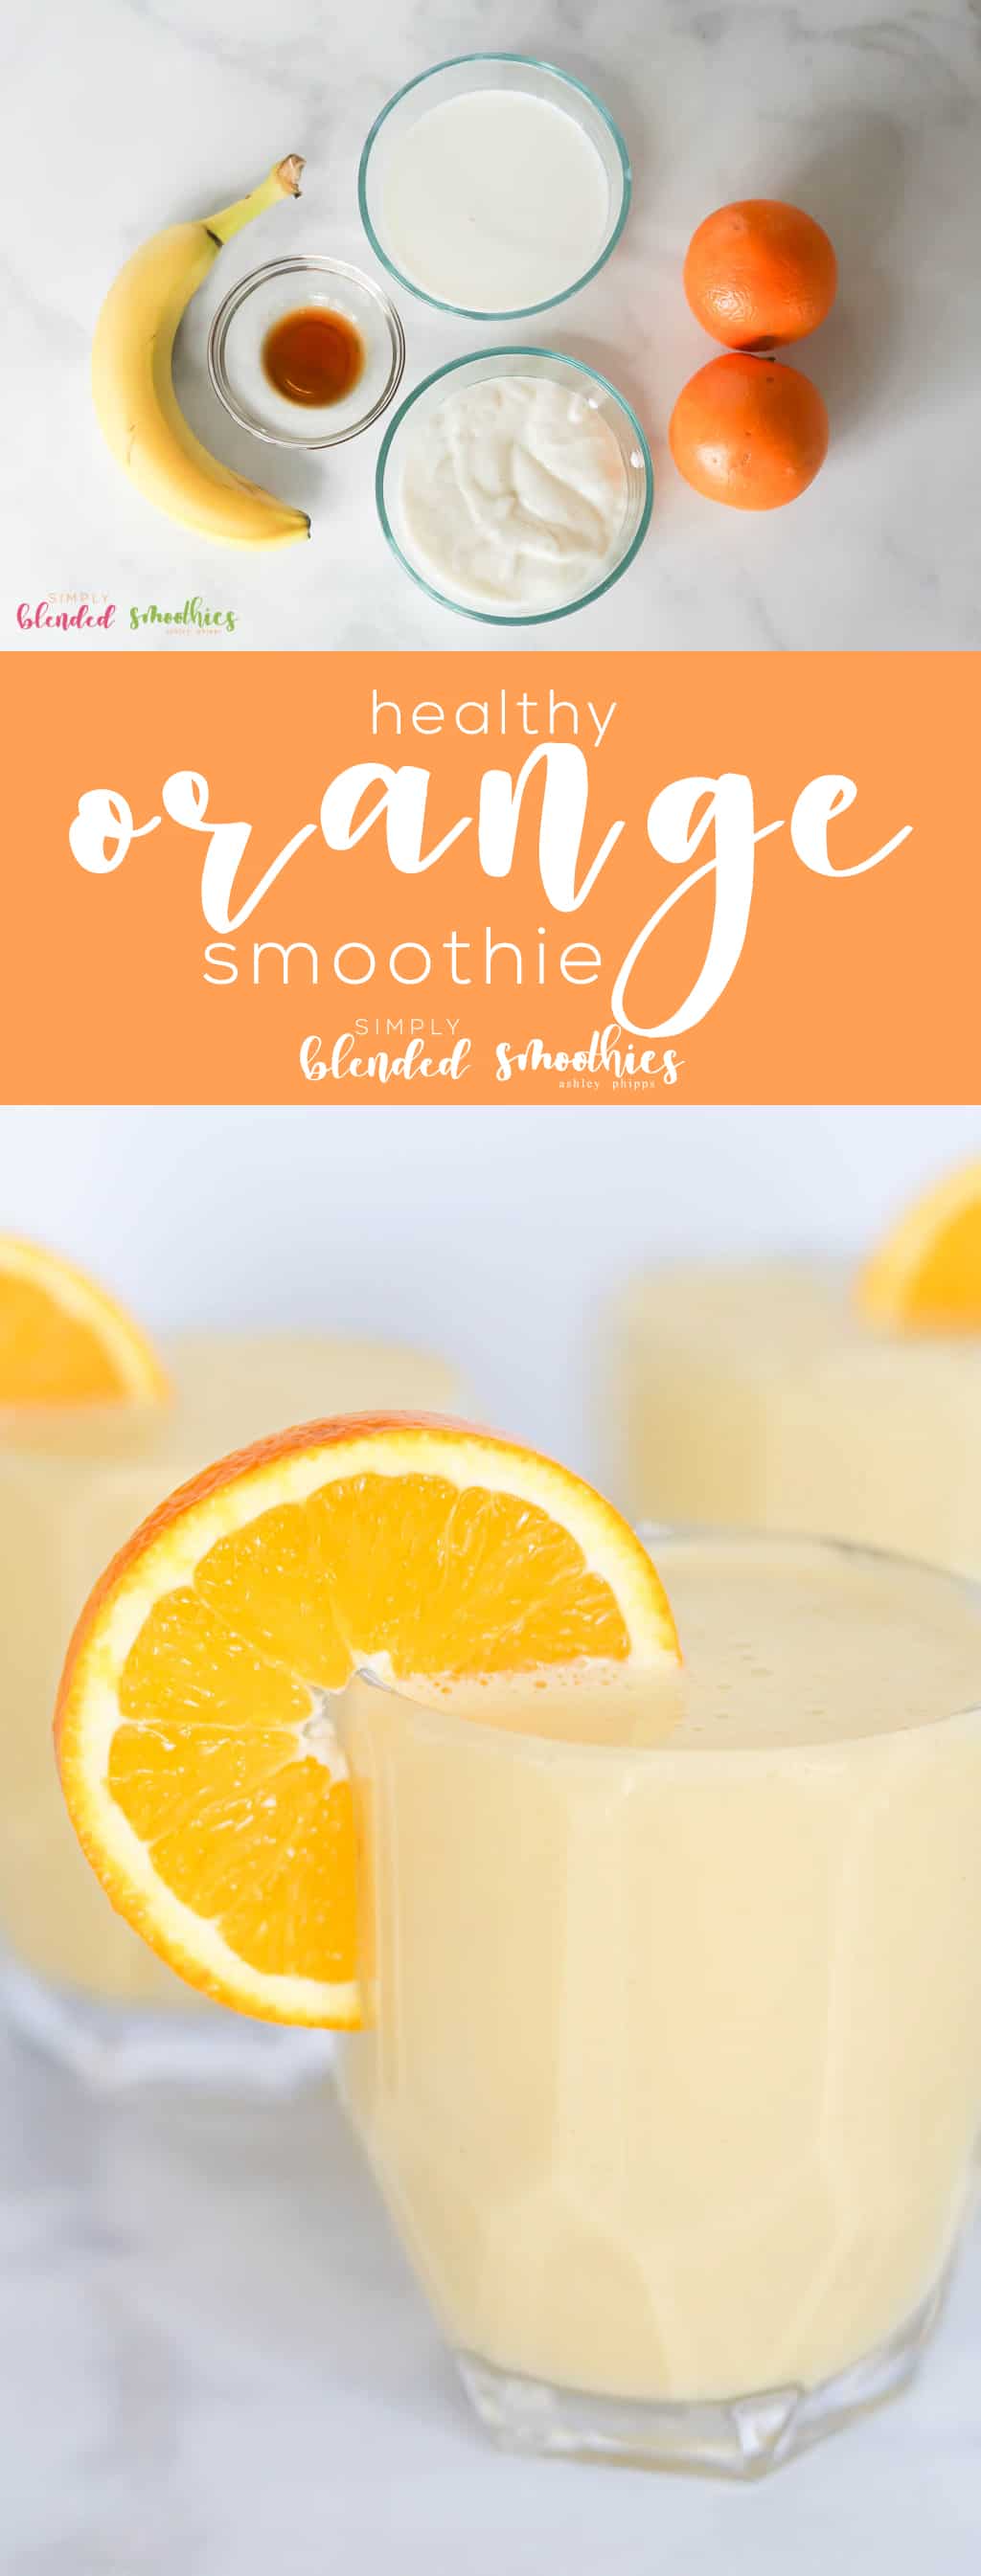 Orange Smoothie - Perfect For Breakfast, Lunch Or Dinner, This Orange Smoothie Is Made With Real, Whole Oranges And Is A Nutrient-Rich And Delicious Smoothie!